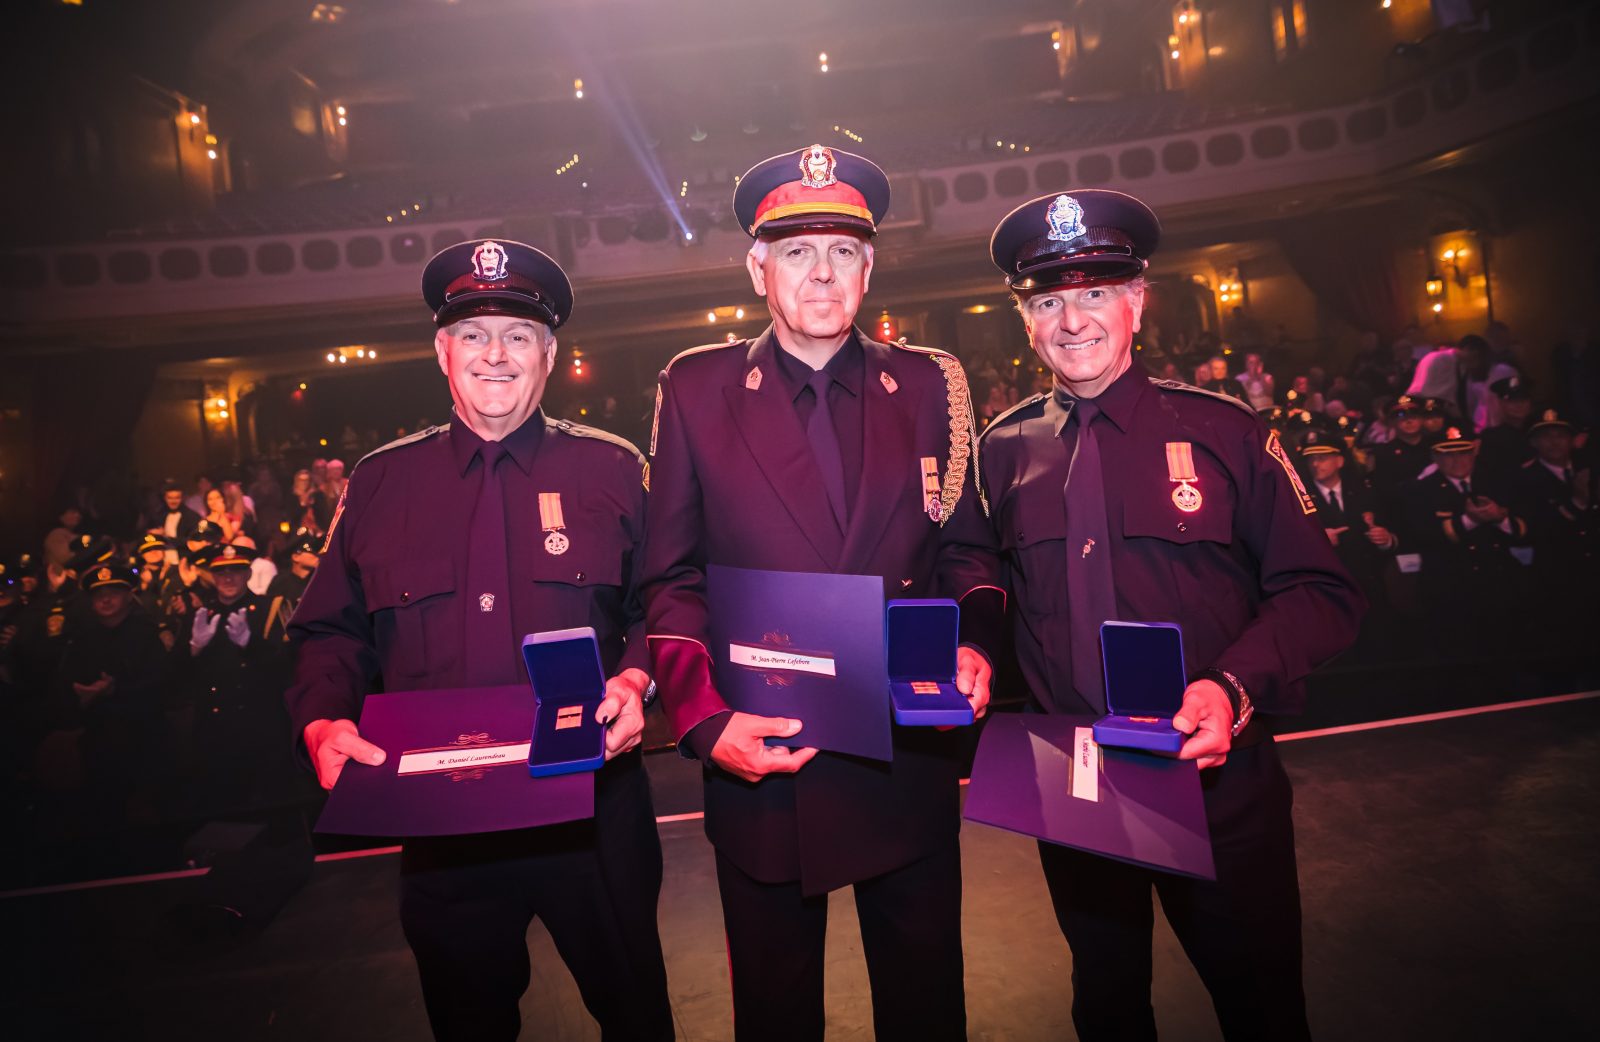 Firefighters honoured for years of service at Granada Theatre